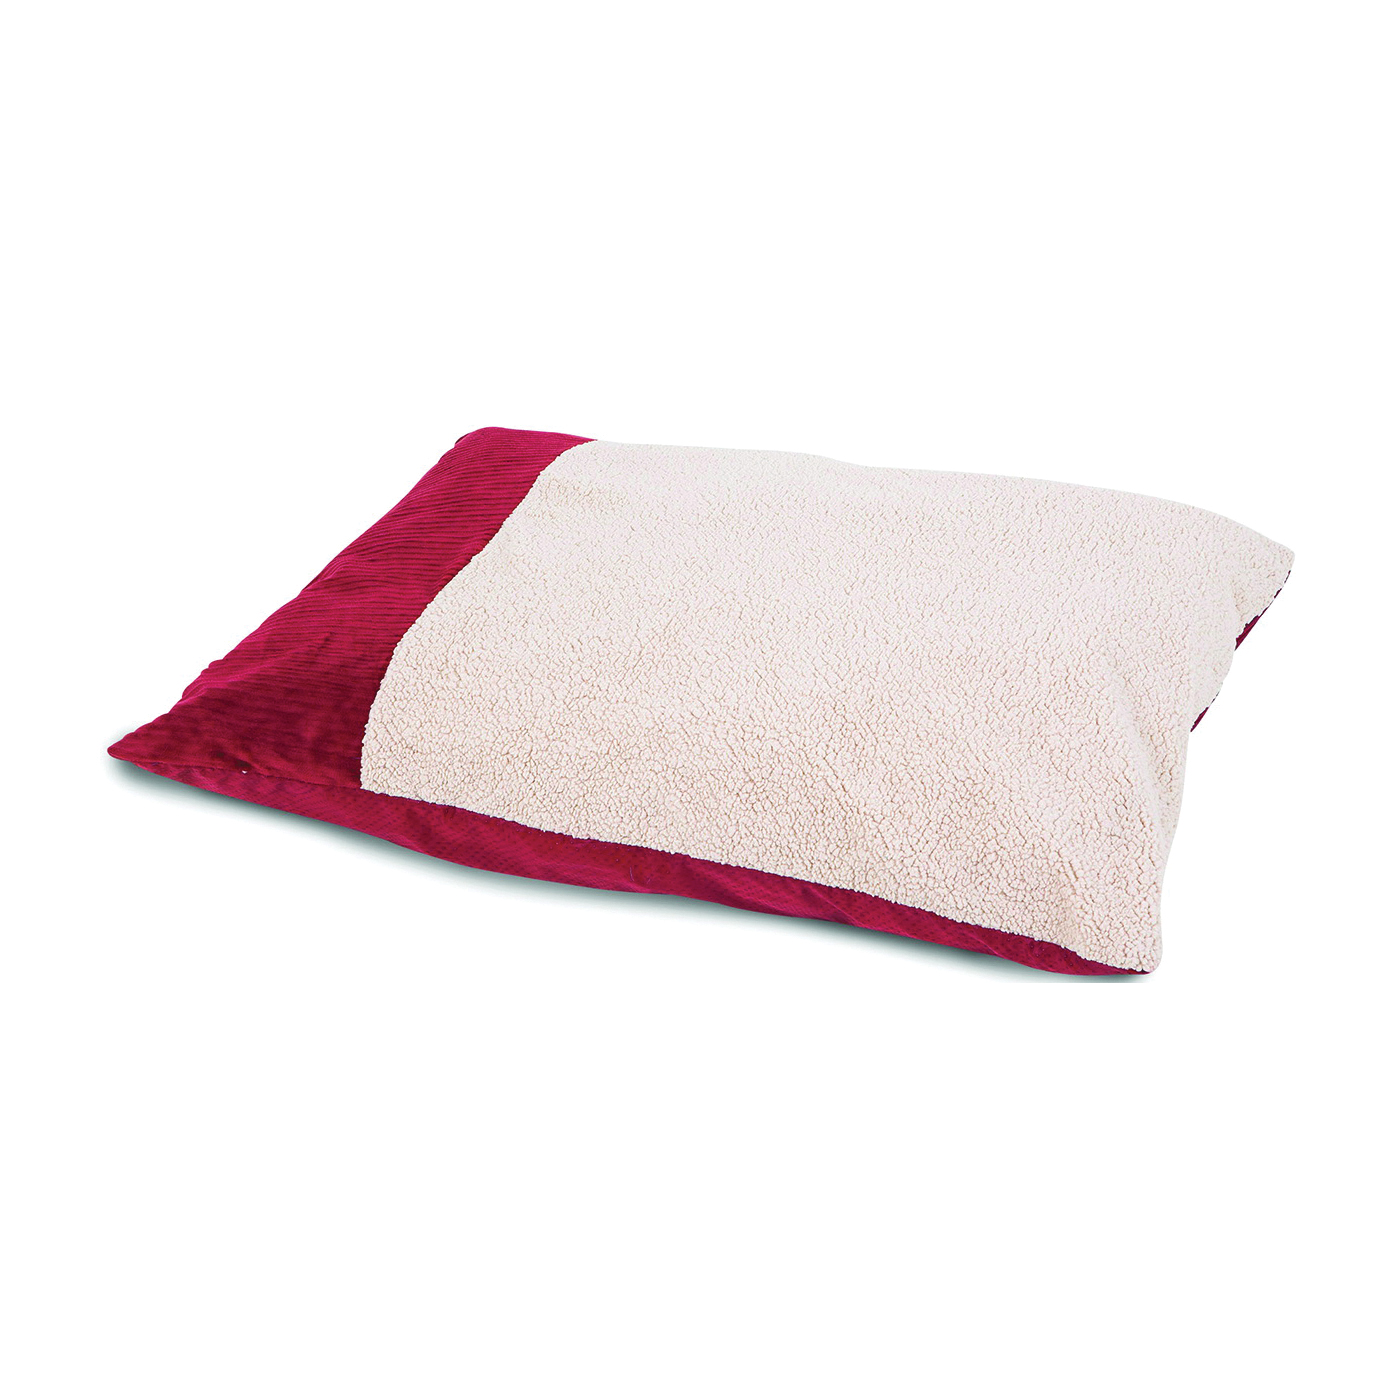 80399 Pillow Bed, 27 in L, 36 in W, Faux Lambs Wool Plush and Wide Wale Corduroy Fabric Cover, Cream/Red